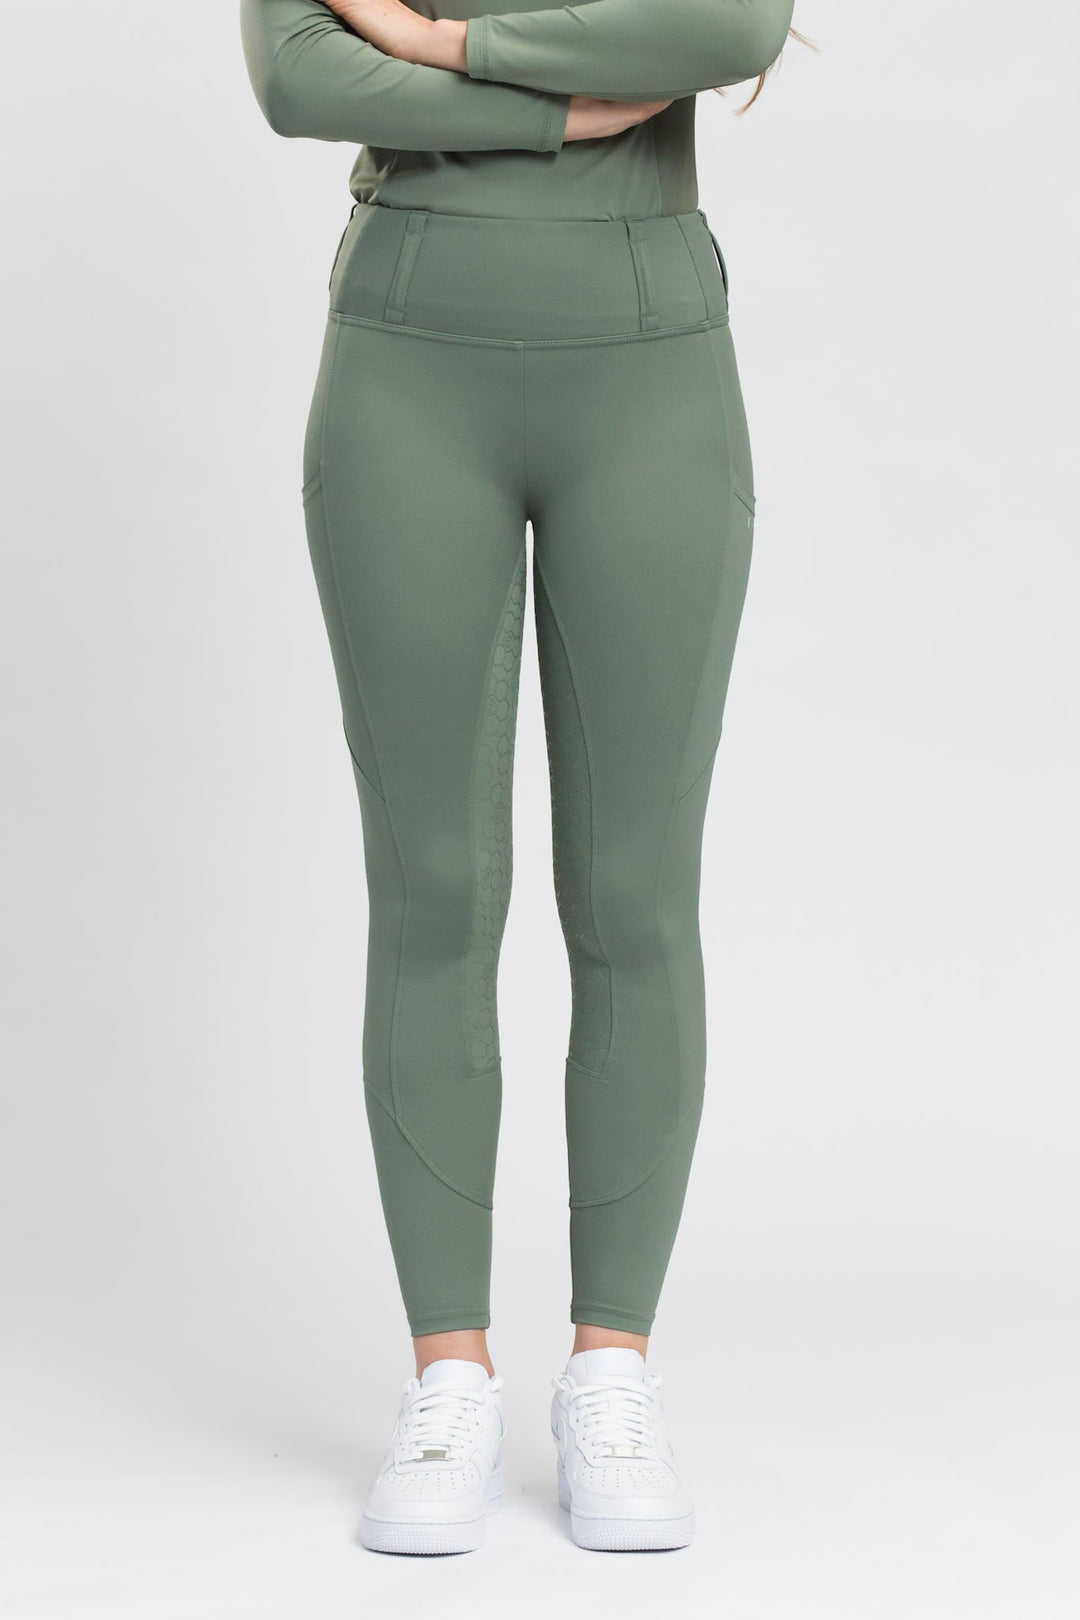 Sage Collective Smudge High Rise 7/8 Leggings In Potting Soil